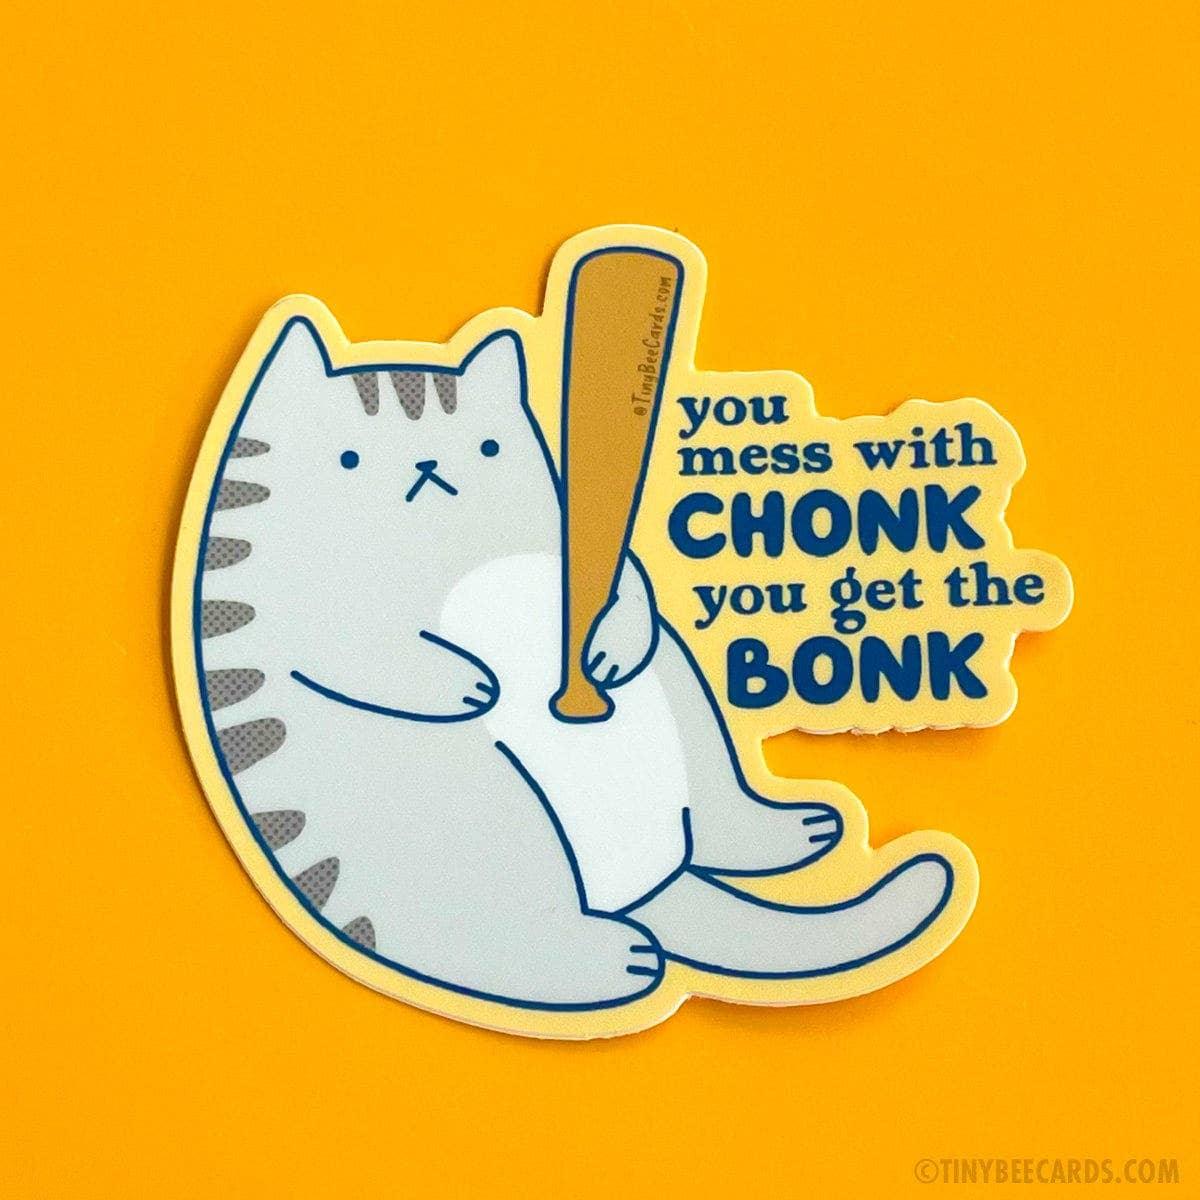 Chonky Cat "Mess with Chonk You Get the" | Vinyl Sticker - Tiny Bee Cards - The Sock Monster